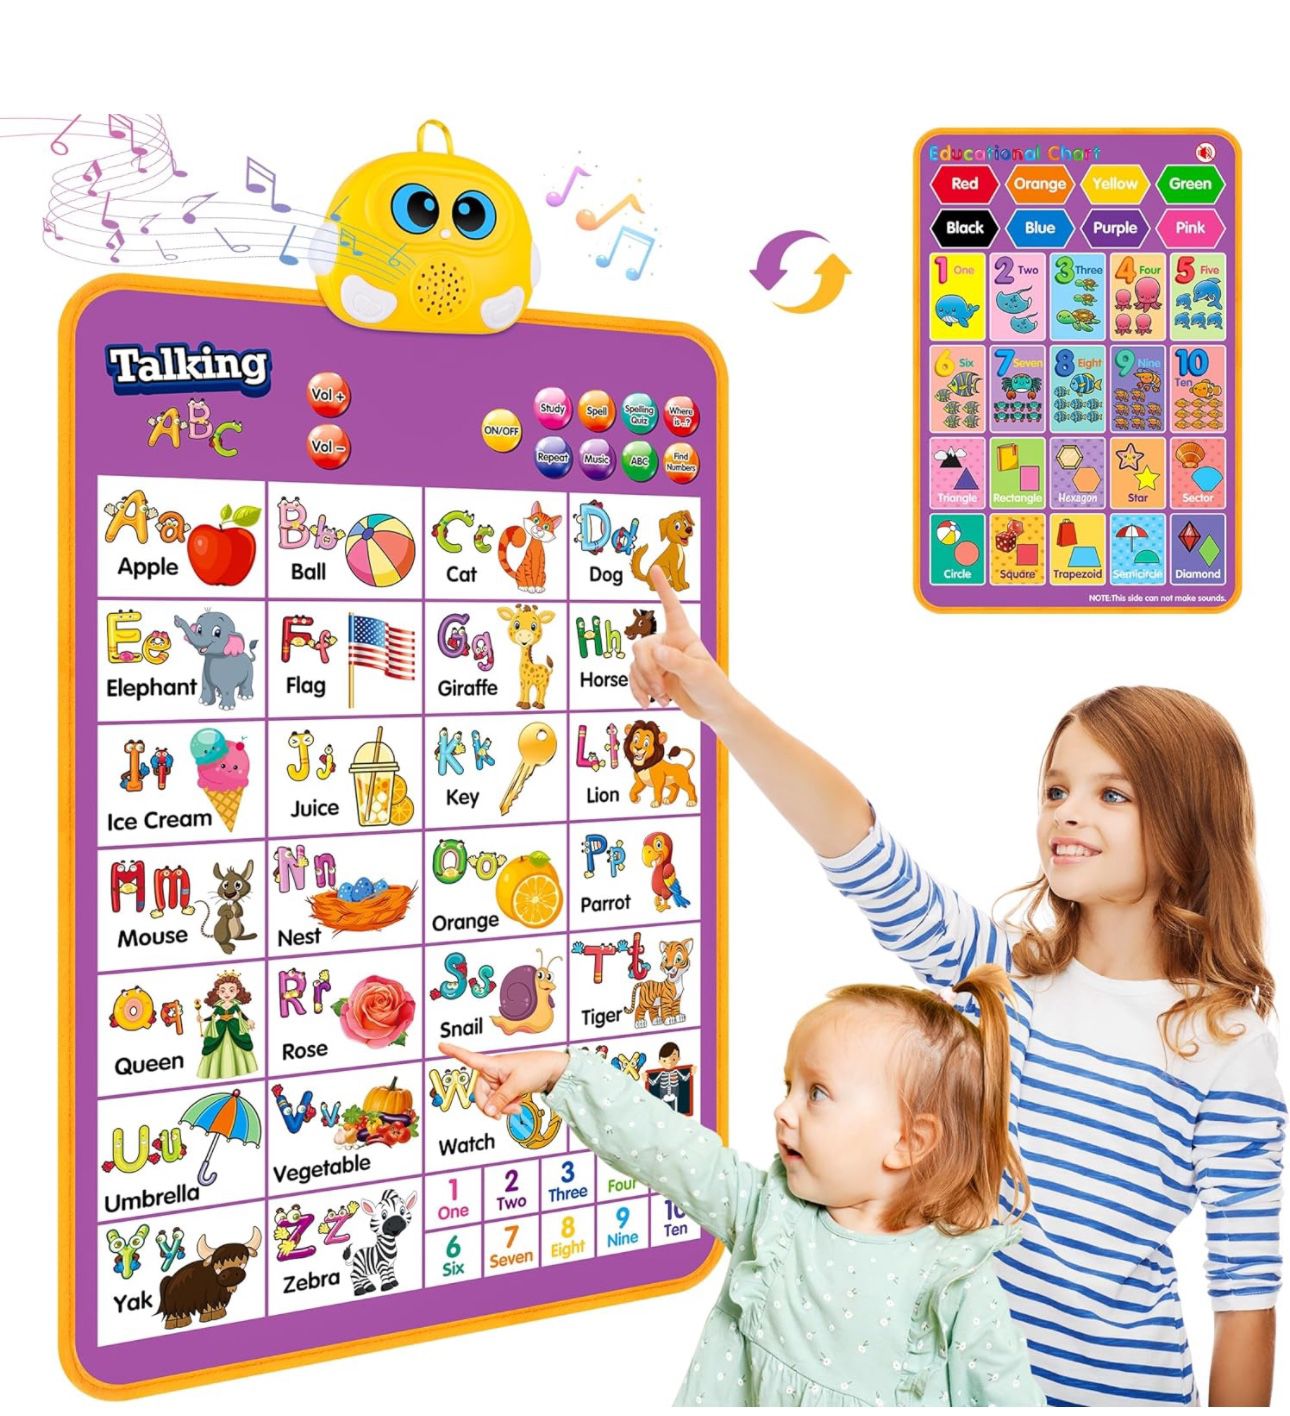 Electronic Alphabet Wall Chart, Talking ABC Interactive Alphabet Poster at Preschool, Kindergarten for Toddlers, Birthday Gifts for Age 1 2 3 4 5 Year